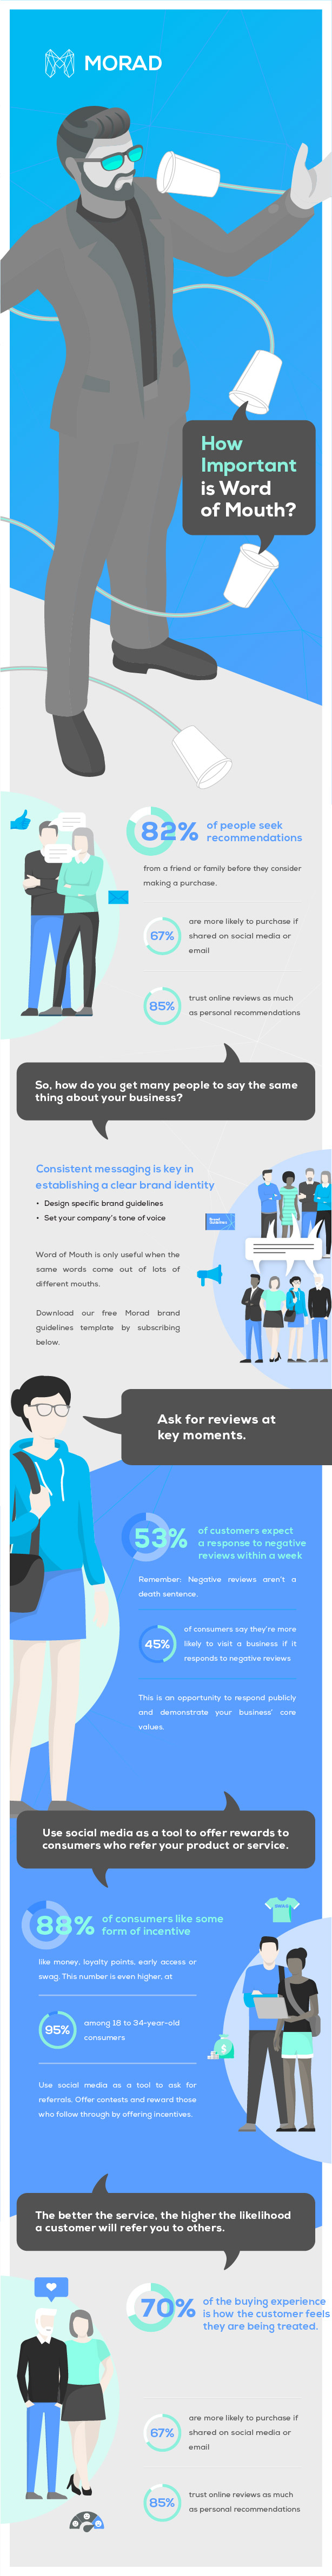 Word-of-mouth marketing infographic by MORAD